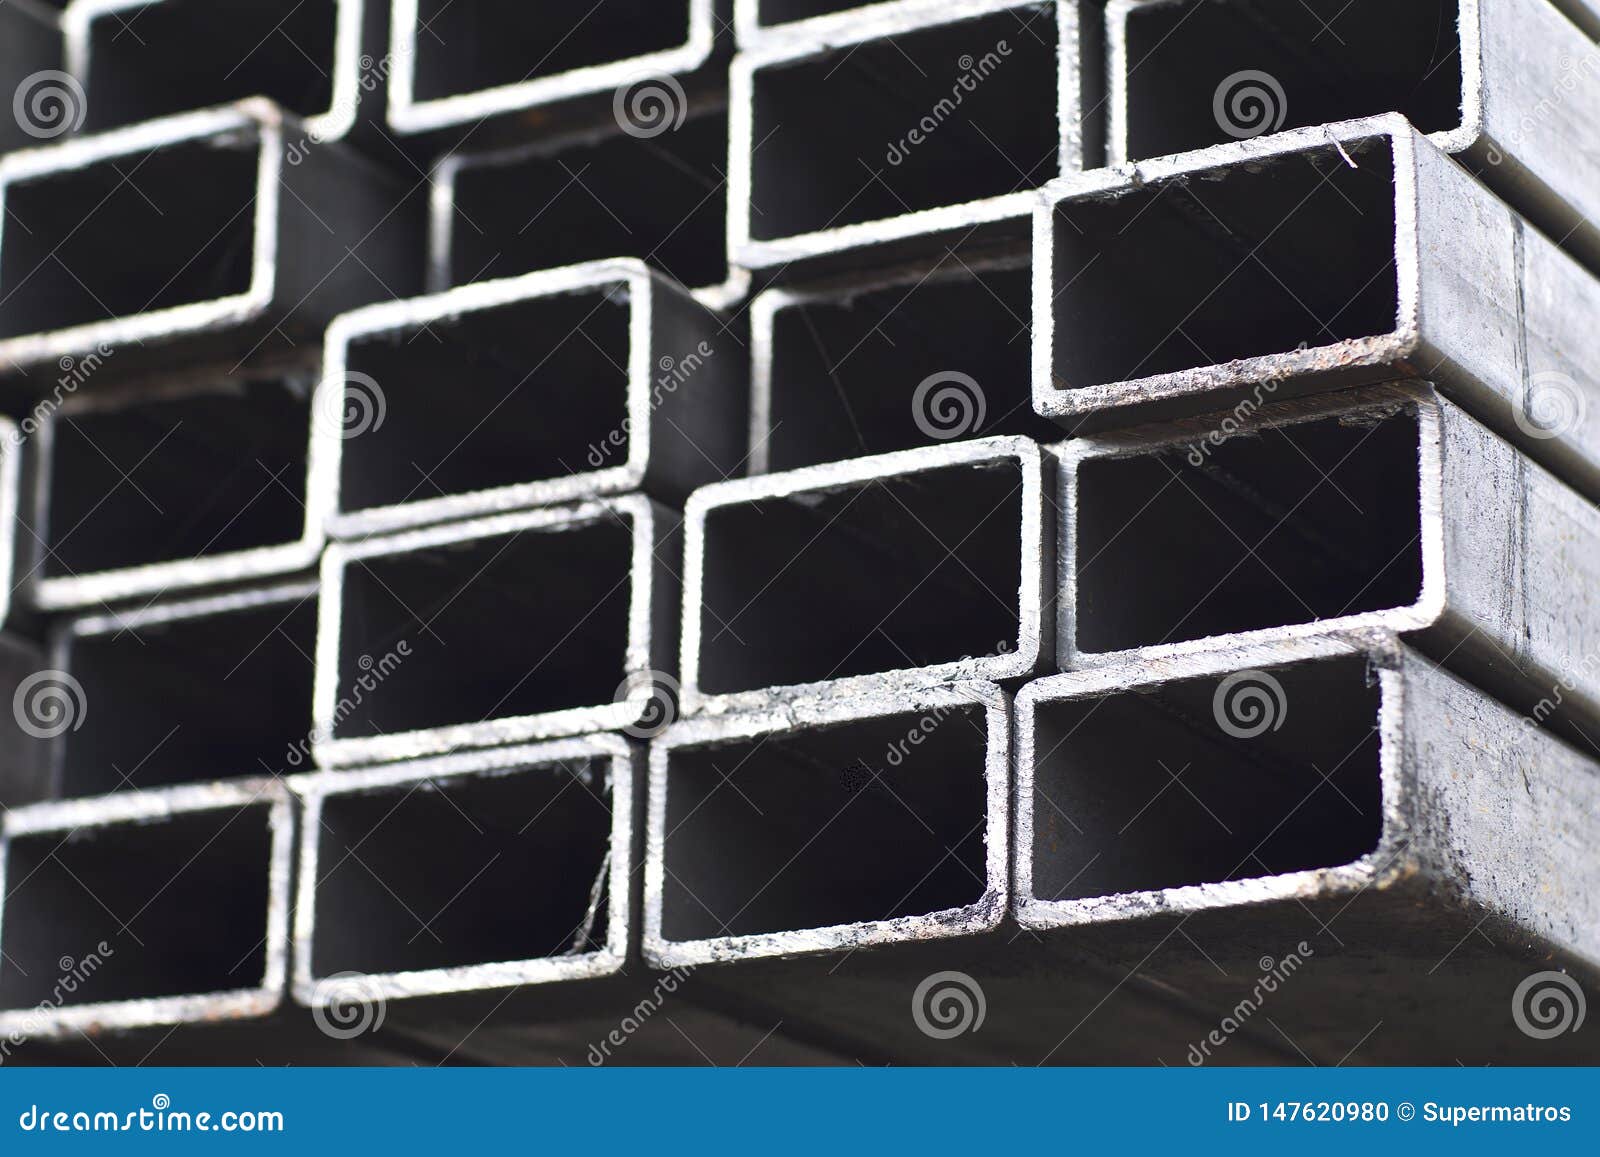 metal profile pipe of rectangular cross section in packs at the warehouse of metal products